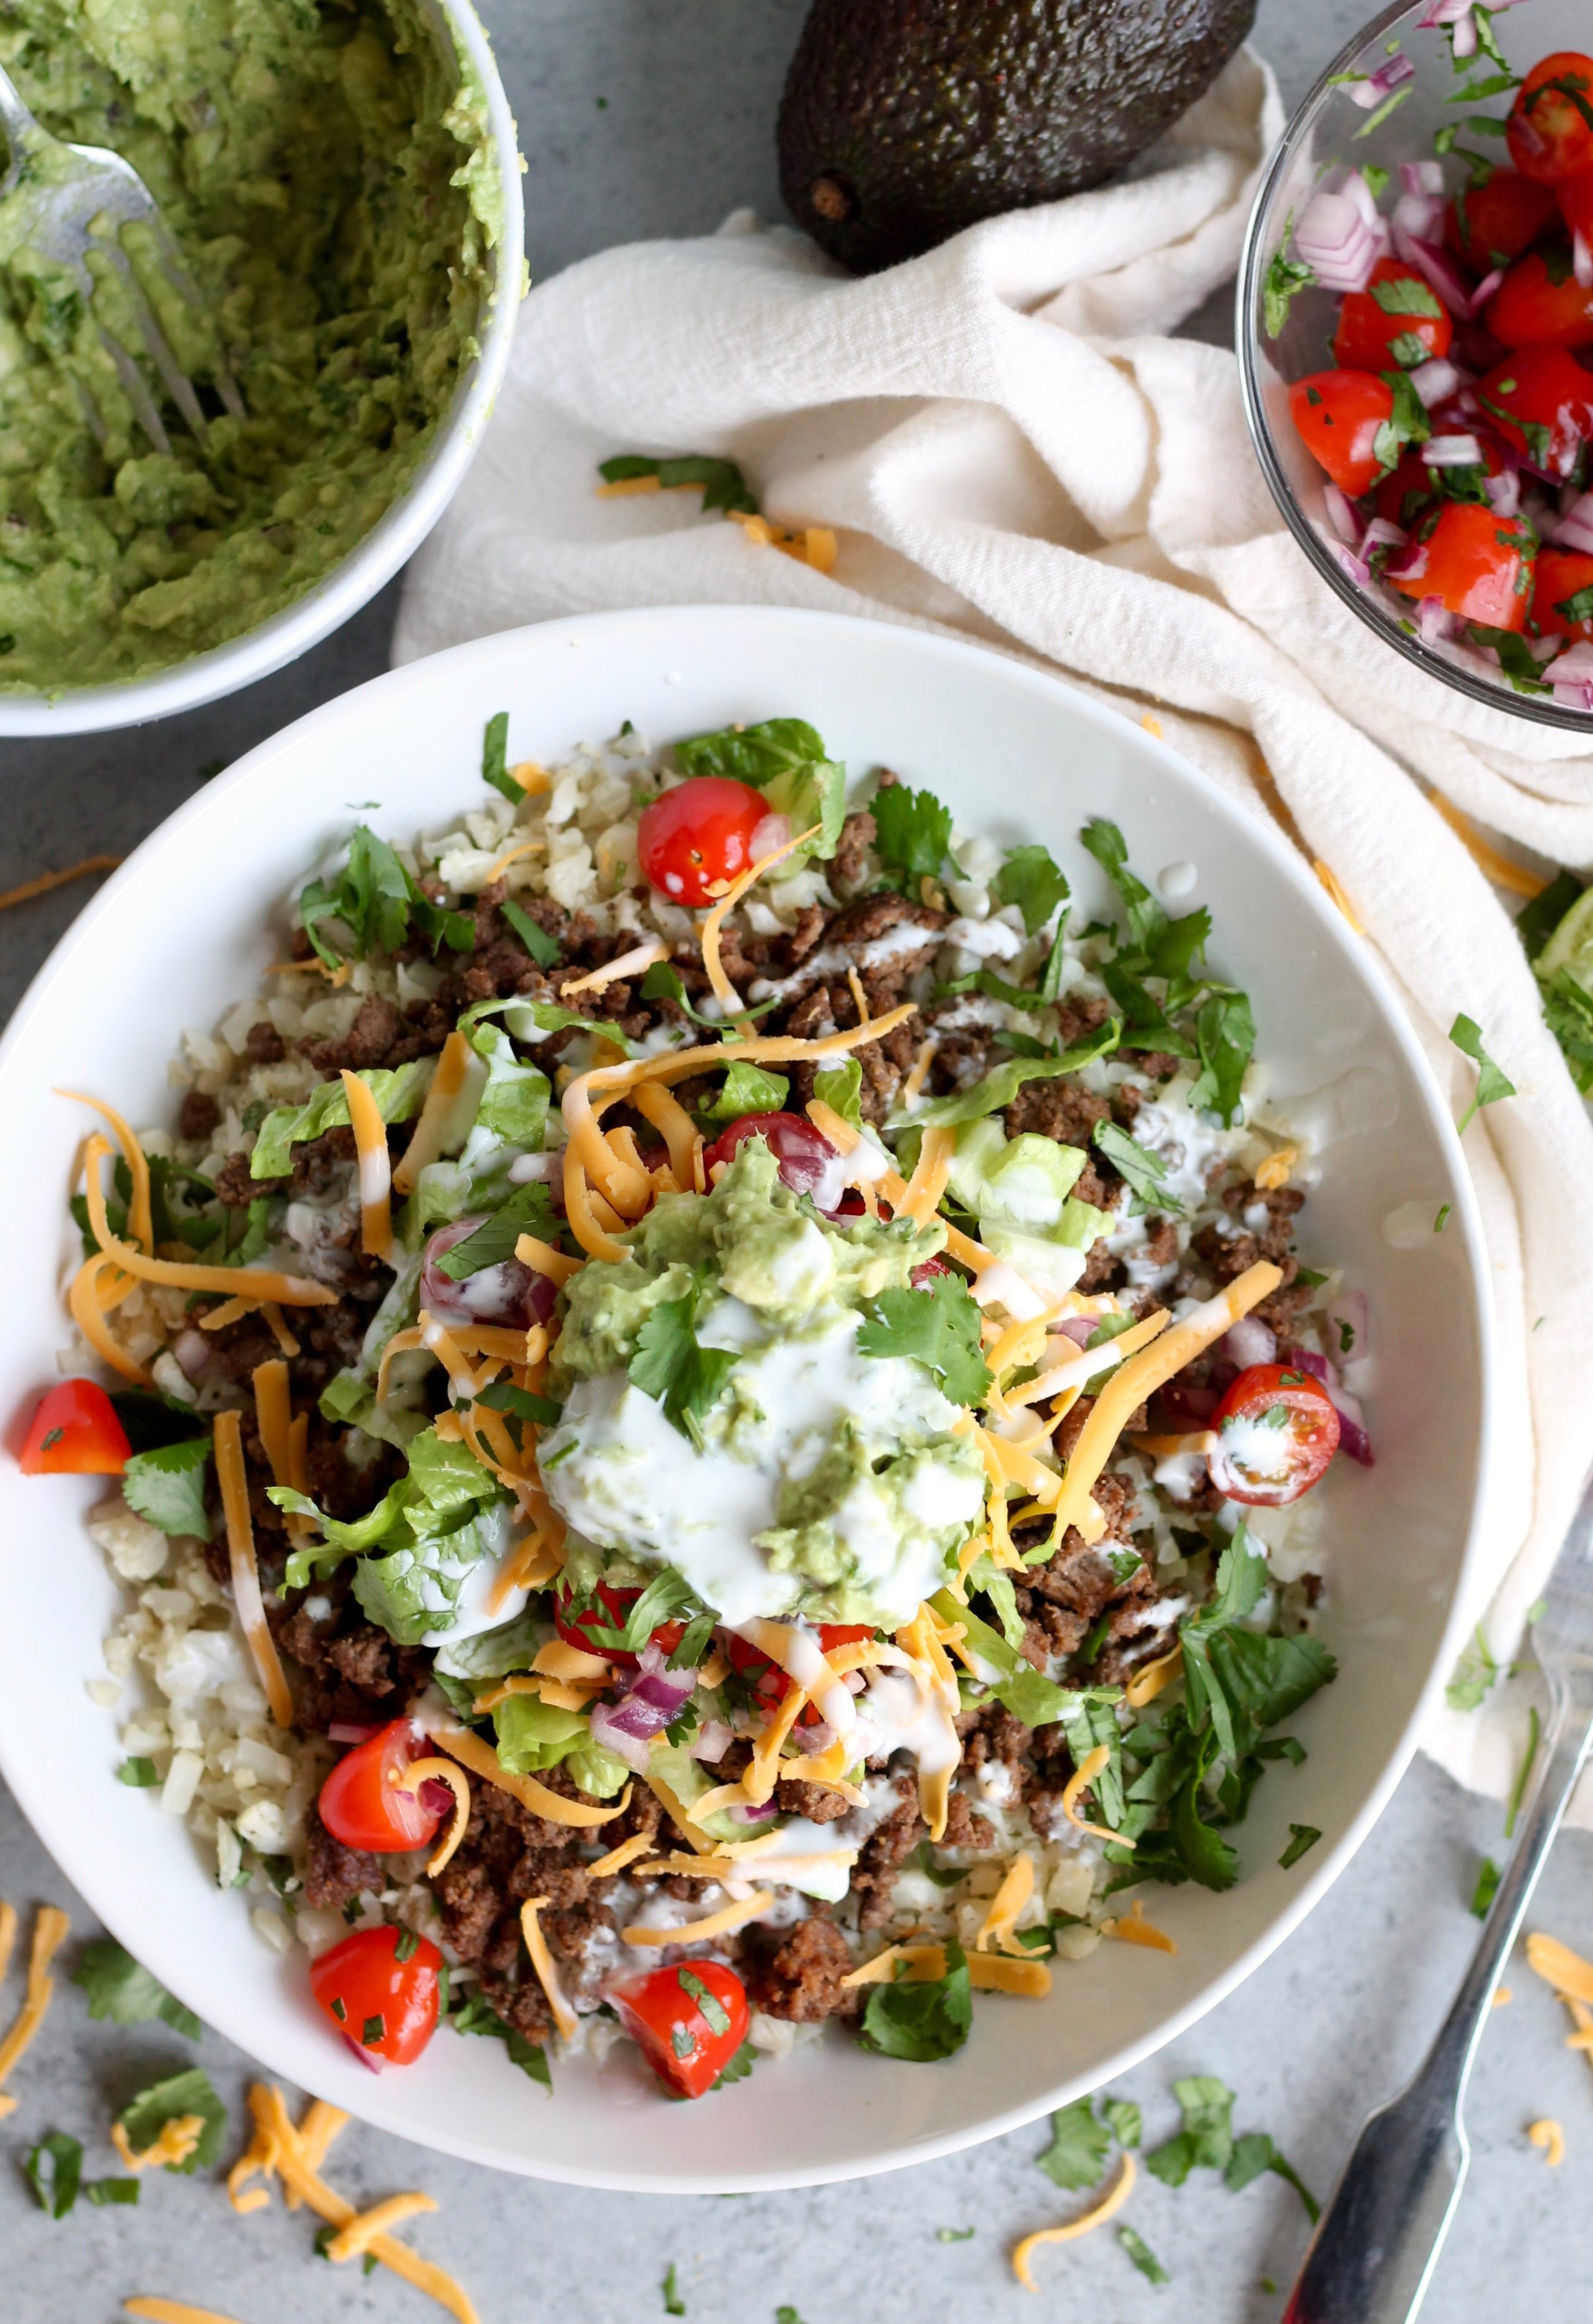 Beef Burrito Bowls with Cilantro Lime Cauliflower Rice from spicesinmydna.com on foodiecrush.com